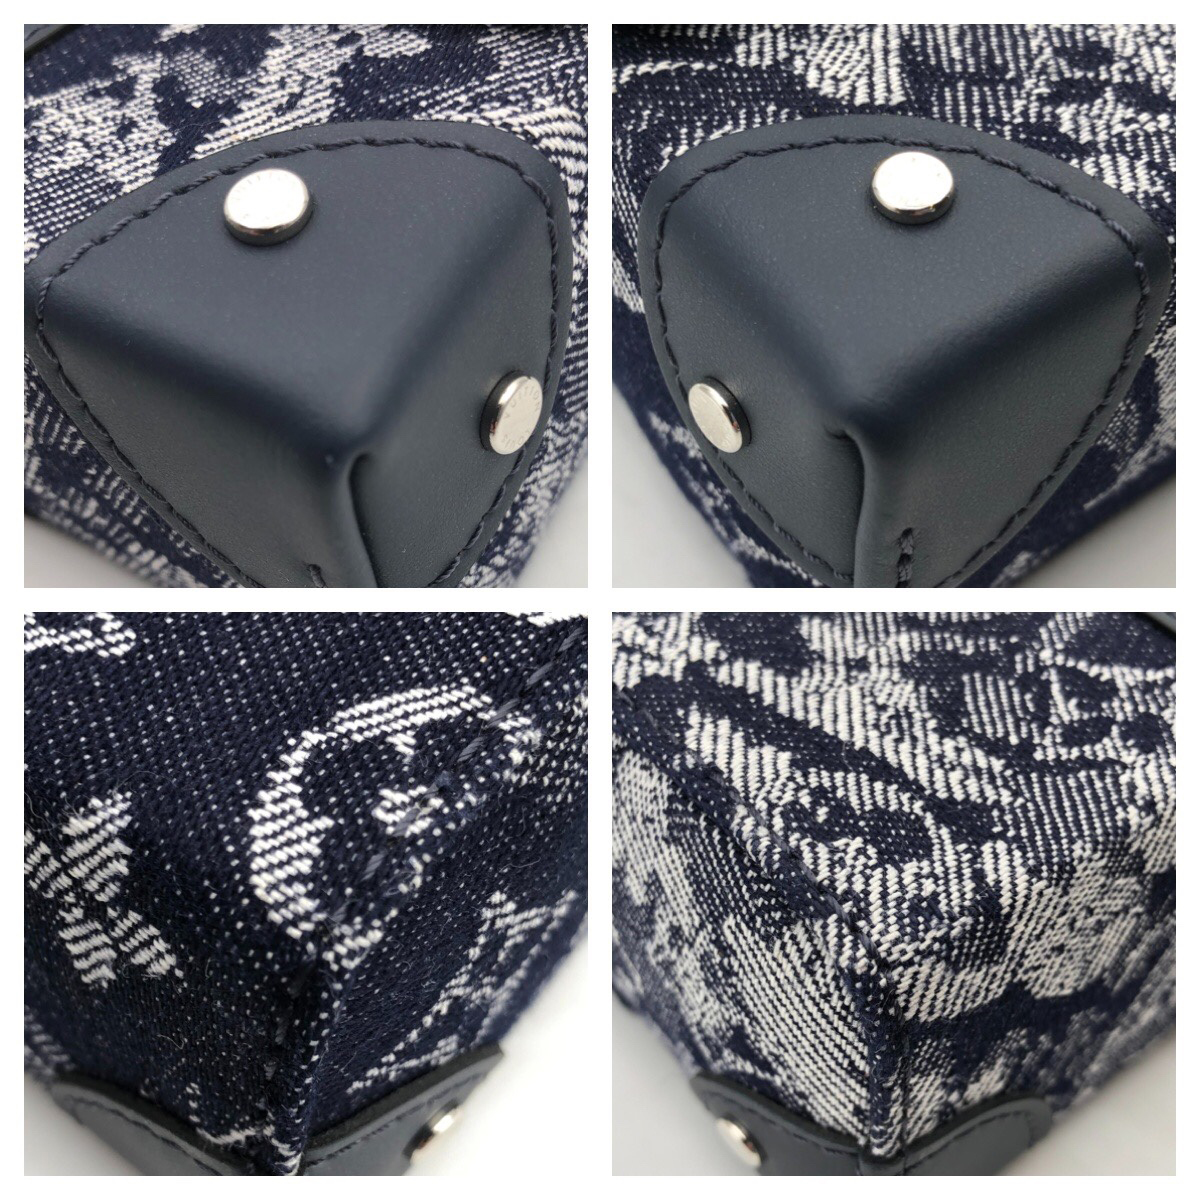 Louis Vuitton trunk messenger bag in blue canvas with monogram tapestry -  DOWNTOWN UPTOWN Genève